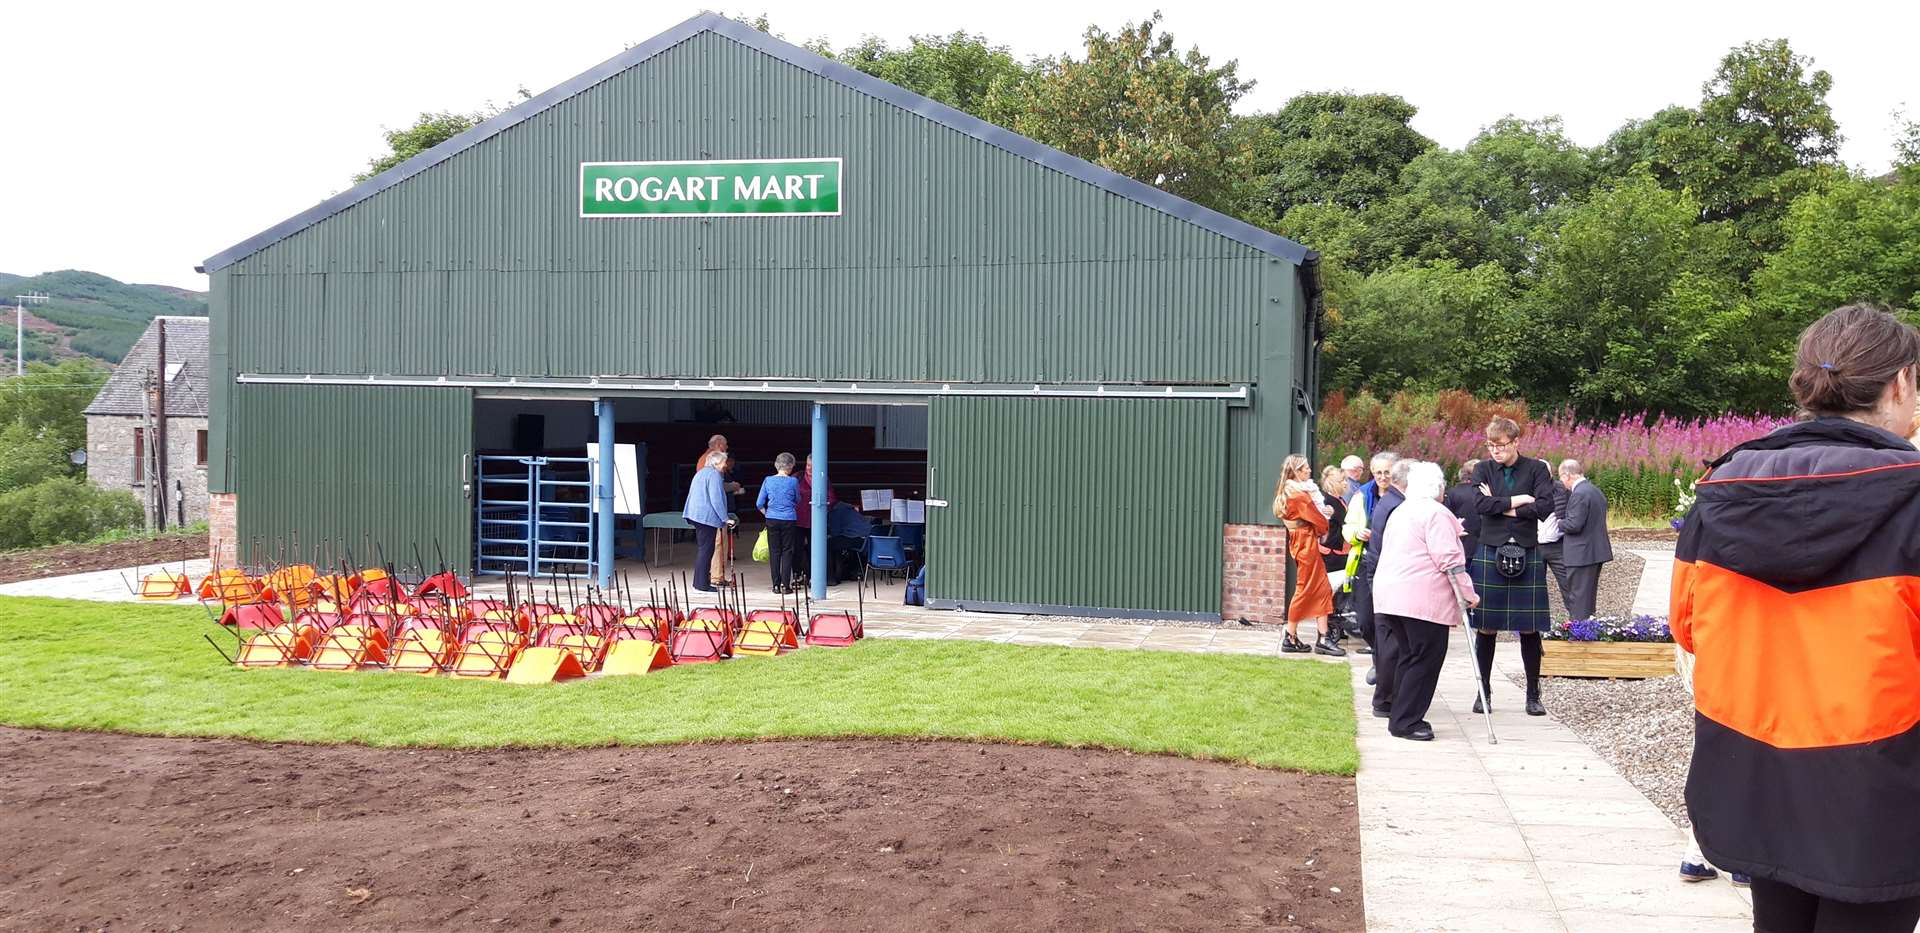 The refurbished Rogart Mart was opened in 2022.